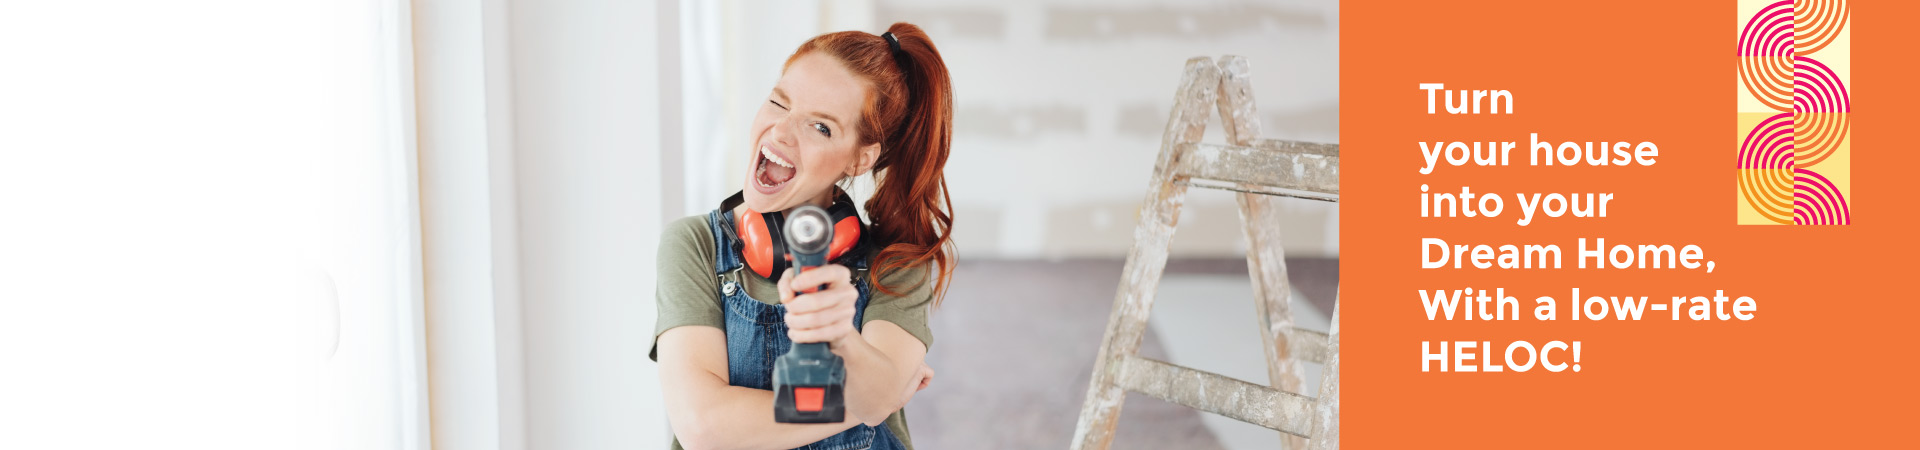 Woman doing renovations holding drill - Turn your house into your dream home, with a low-rate HELOC!